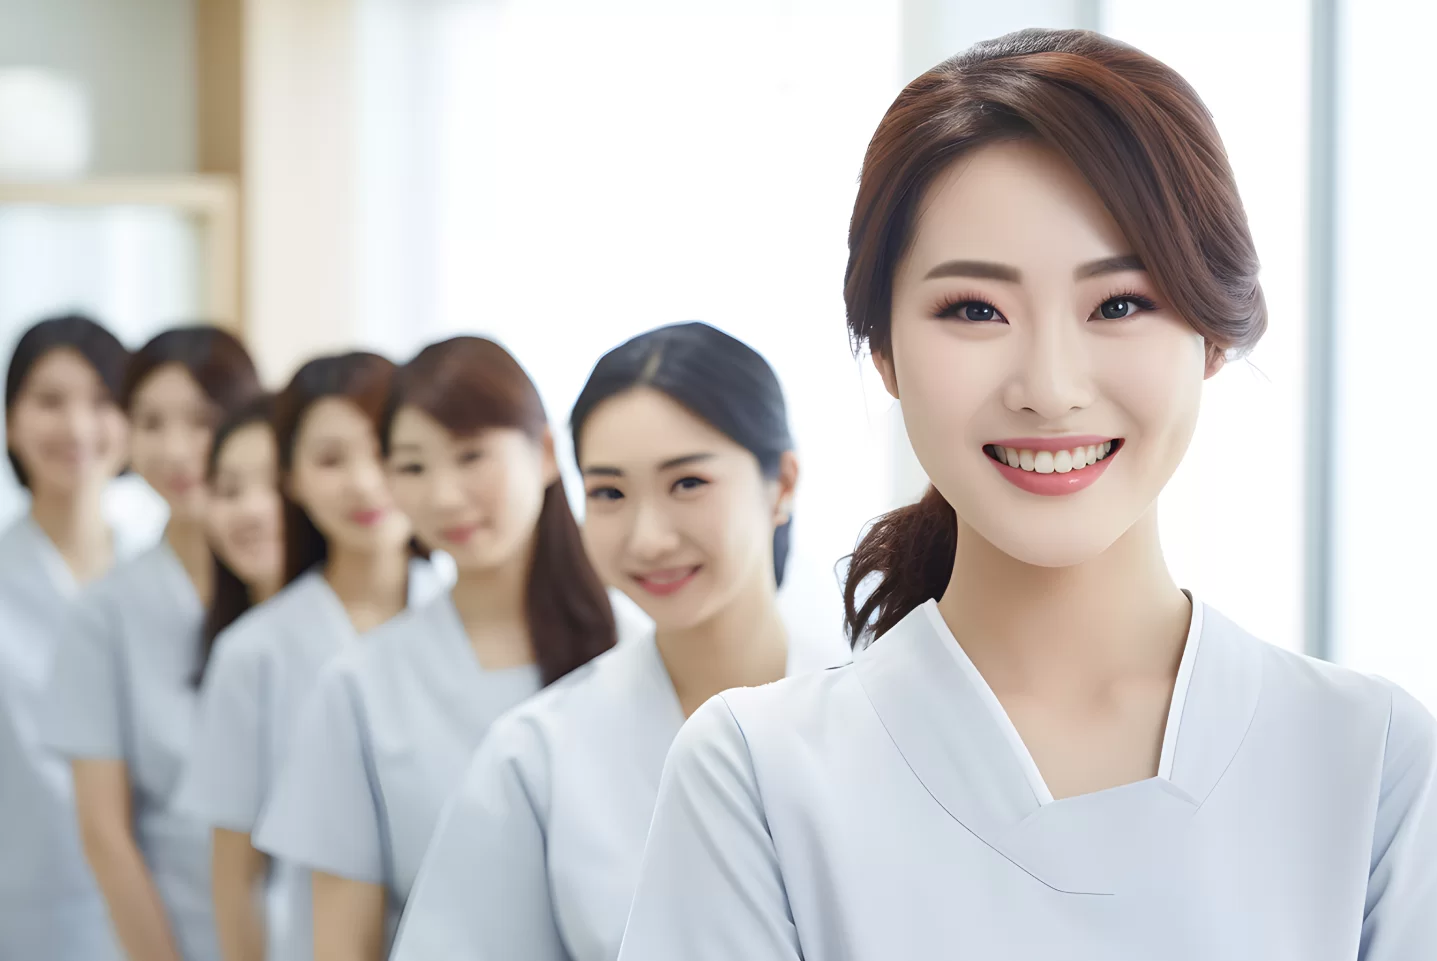 group-skincare-clinic-worker-smile11.webp